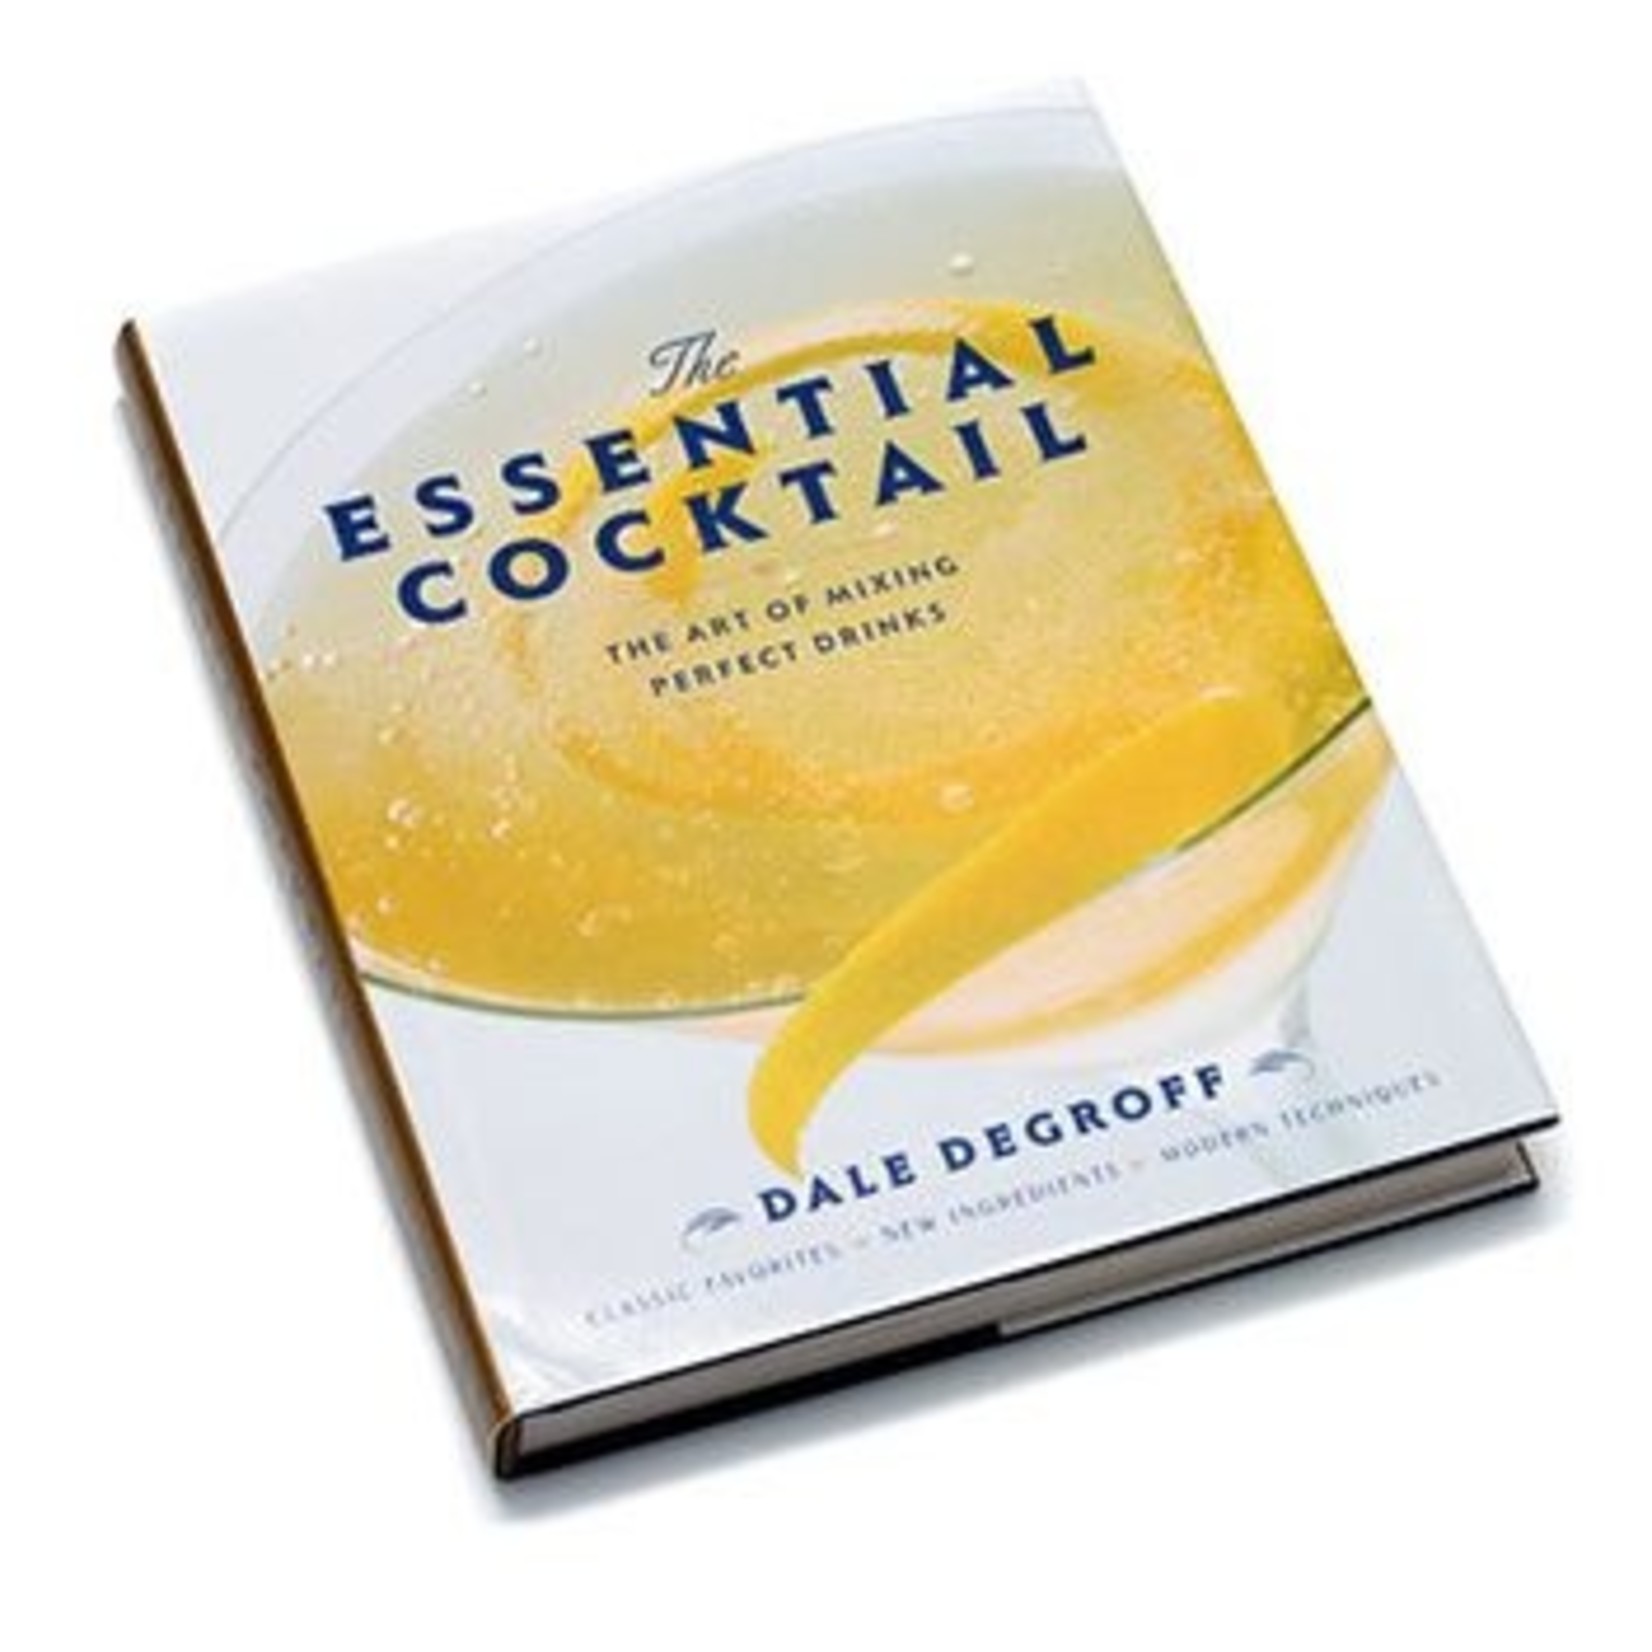 The Essential Cocktail Book by Dale Degroff